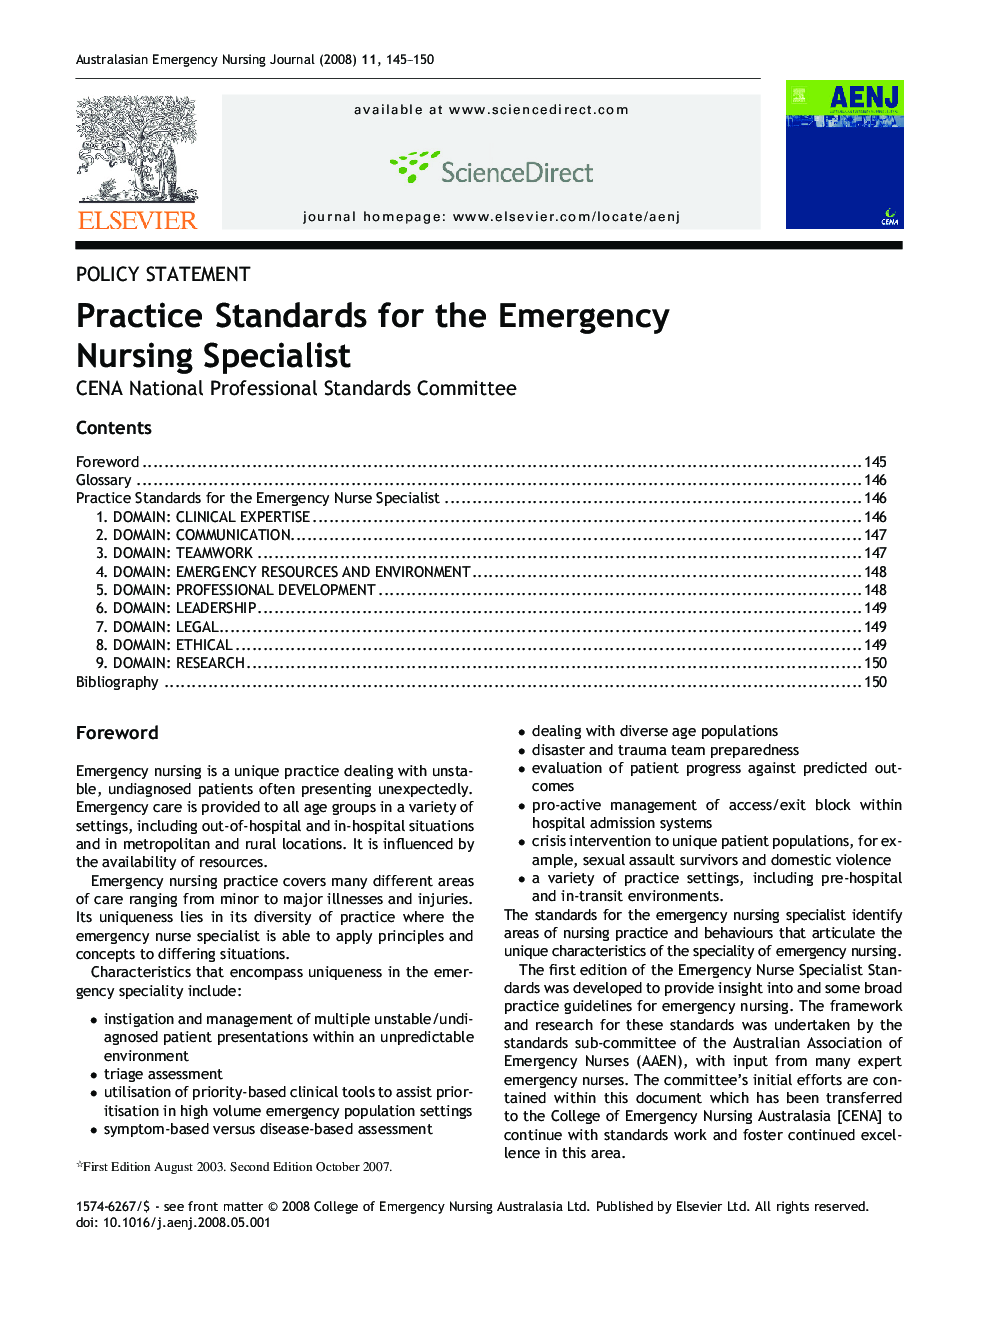 Practice Standards for the Emergency Nursing Specialist